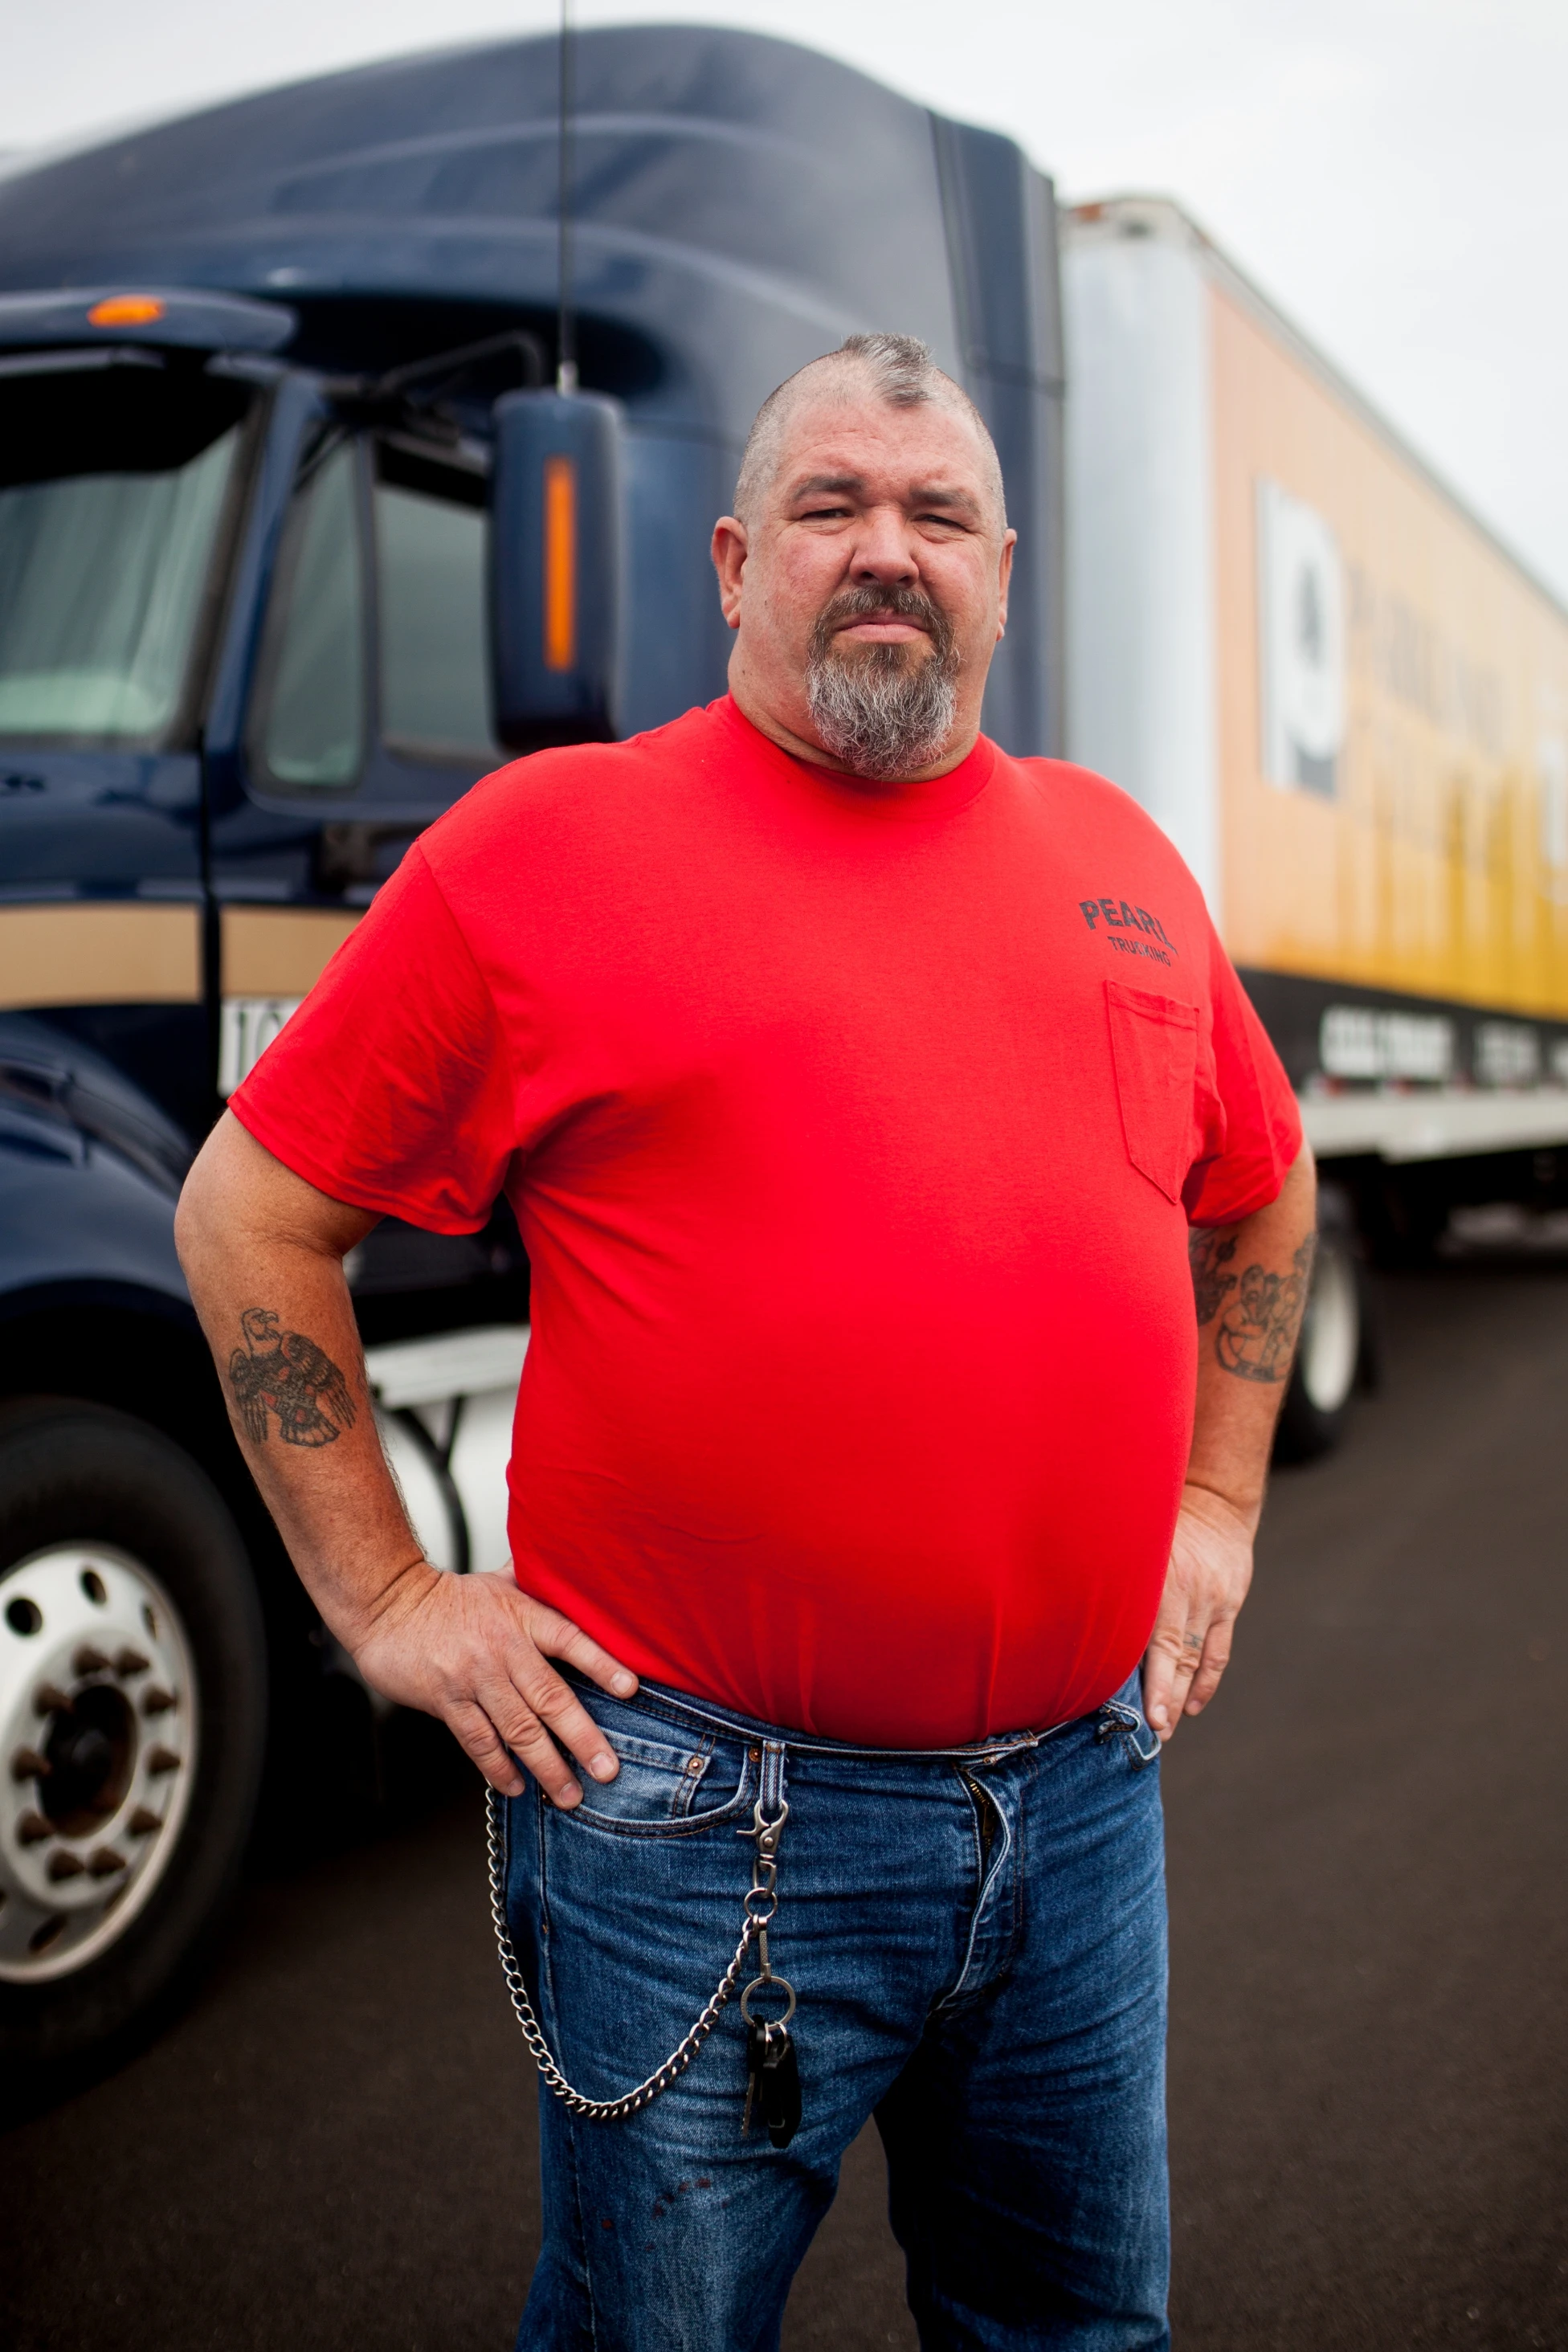 A man in a red shirt standing in front of a semi truck.